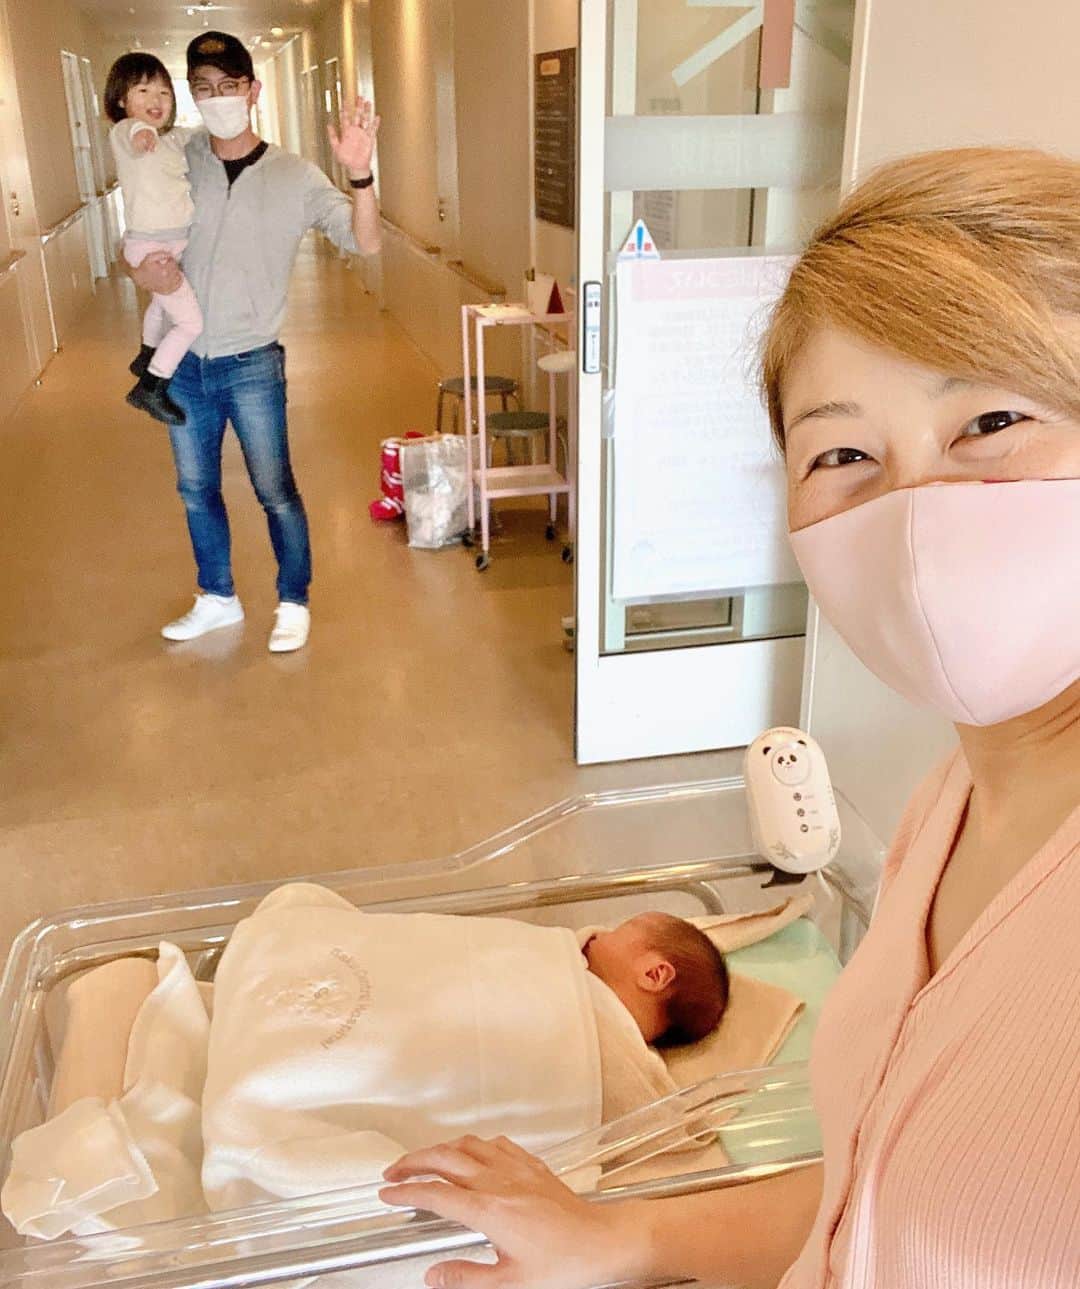 吉田ちかのインスタグラム：「First ever family photo with our new baby!  We aren’t allowed any visitors at the hospital, but I was able to see Osaru-san and Pudding for a few seconds at the door when they came to drop off some things for me yesterday😊  Pudding got a glimpse of her little brother and her face just lit up like I had never seen before❤️  I told her we’d be home soon and she just nodded smiling😊 She has grown up so much in the last 3 weeks!   She has never spent this much time away from me and I know it must have been really hard on her, but she barely cried and was so strong through it all!   Watching her walk down the hall holding daddy’s hand made me so emotional.   We’ll be home soon!!  4人の初めての家族写真📸💕  コロナで面会はできませんが、荷物の受け渡しの際に入り口で一瞬だけプリンとおさるさんに会うことができました。  プリンに赤ちゃんを見せたら今までに見たことのないような笑顔でベビーを見つめていました。お姉ちゃんだ😭 この３週間で本当に成長して🥺💕感動！「もうすぐ帰るからね」と伝えたら、ニコニコしながら「うん！」と頷いてくれました。  こんなに長い間私と離れることなんて一度もなく、本当は寂しかったはずなのに、ほとんど泣かずずっと頑張ってくれました。  パパの手を繋いで廊下を歩いていくプリンの後ろ姿が愛おしくて泣けてきました😭  もうすぐ会えるよ❤️」